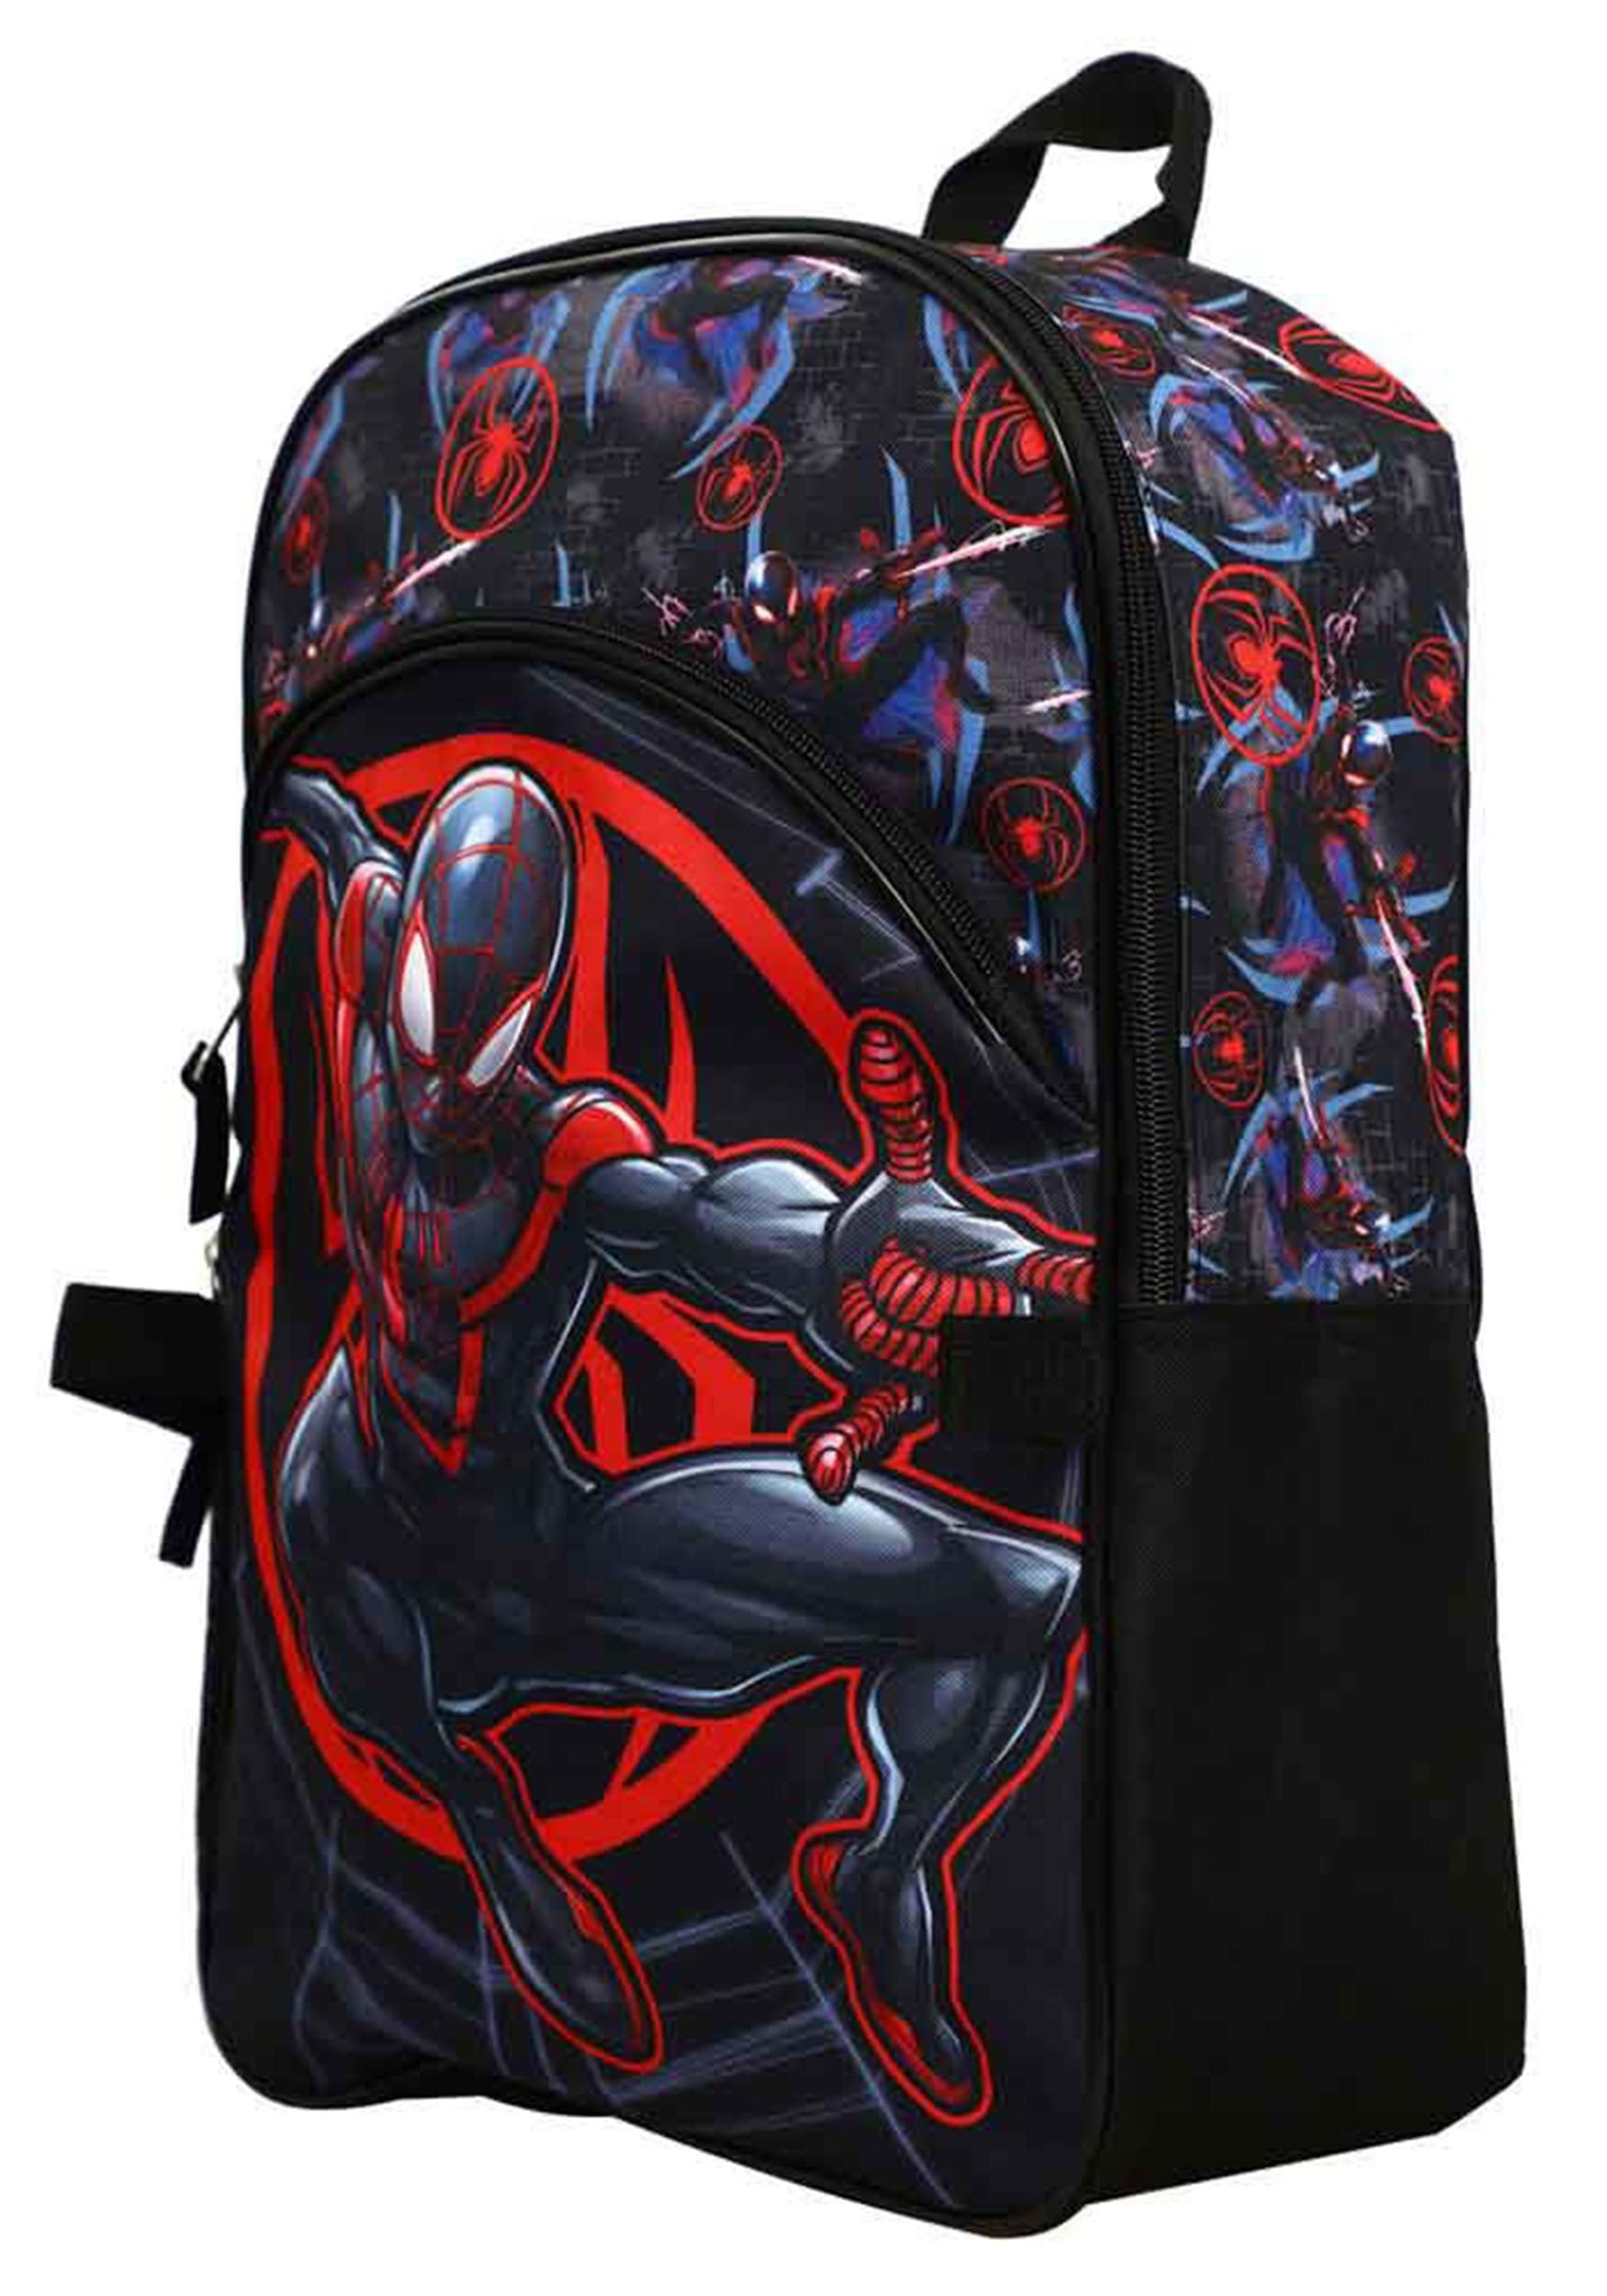 https://images.fun.com/products/90379/2-1-259877/marvel-spider-man-miles-youth-lunch-tote-backpac-alt-3.jpg